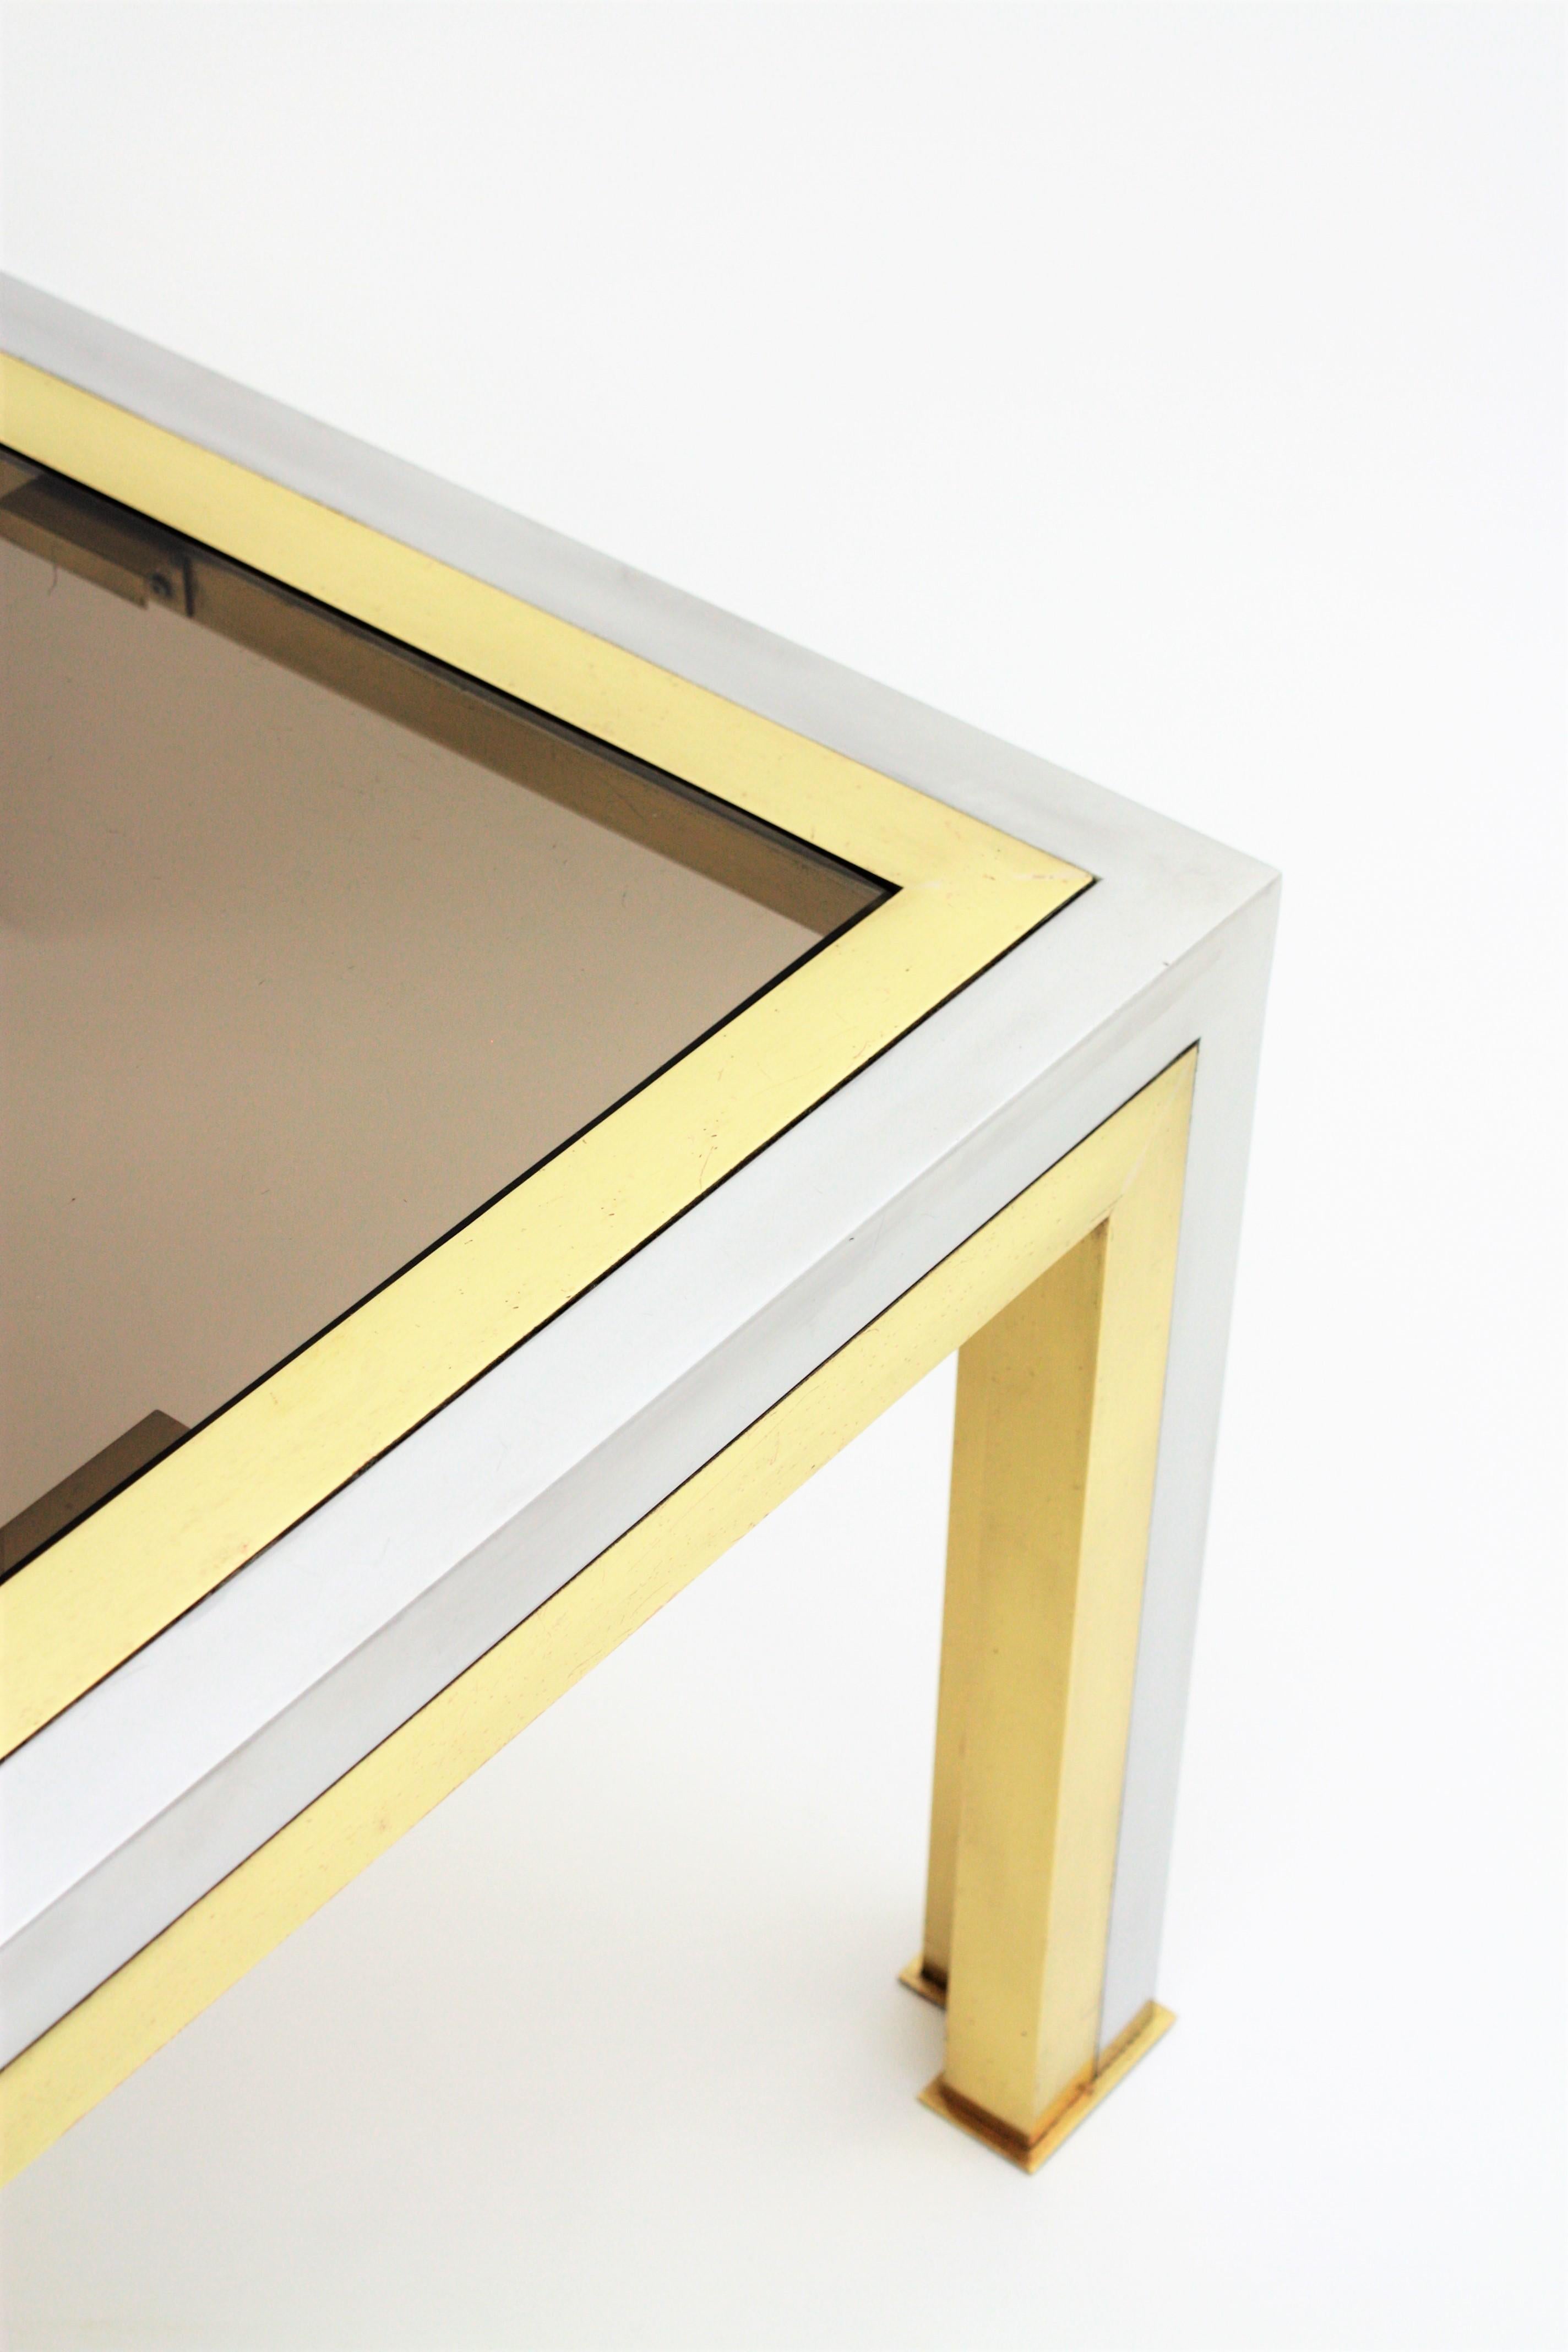 Romeo Rega Coffee Table in Brass, Chromed Steel and Glass 9